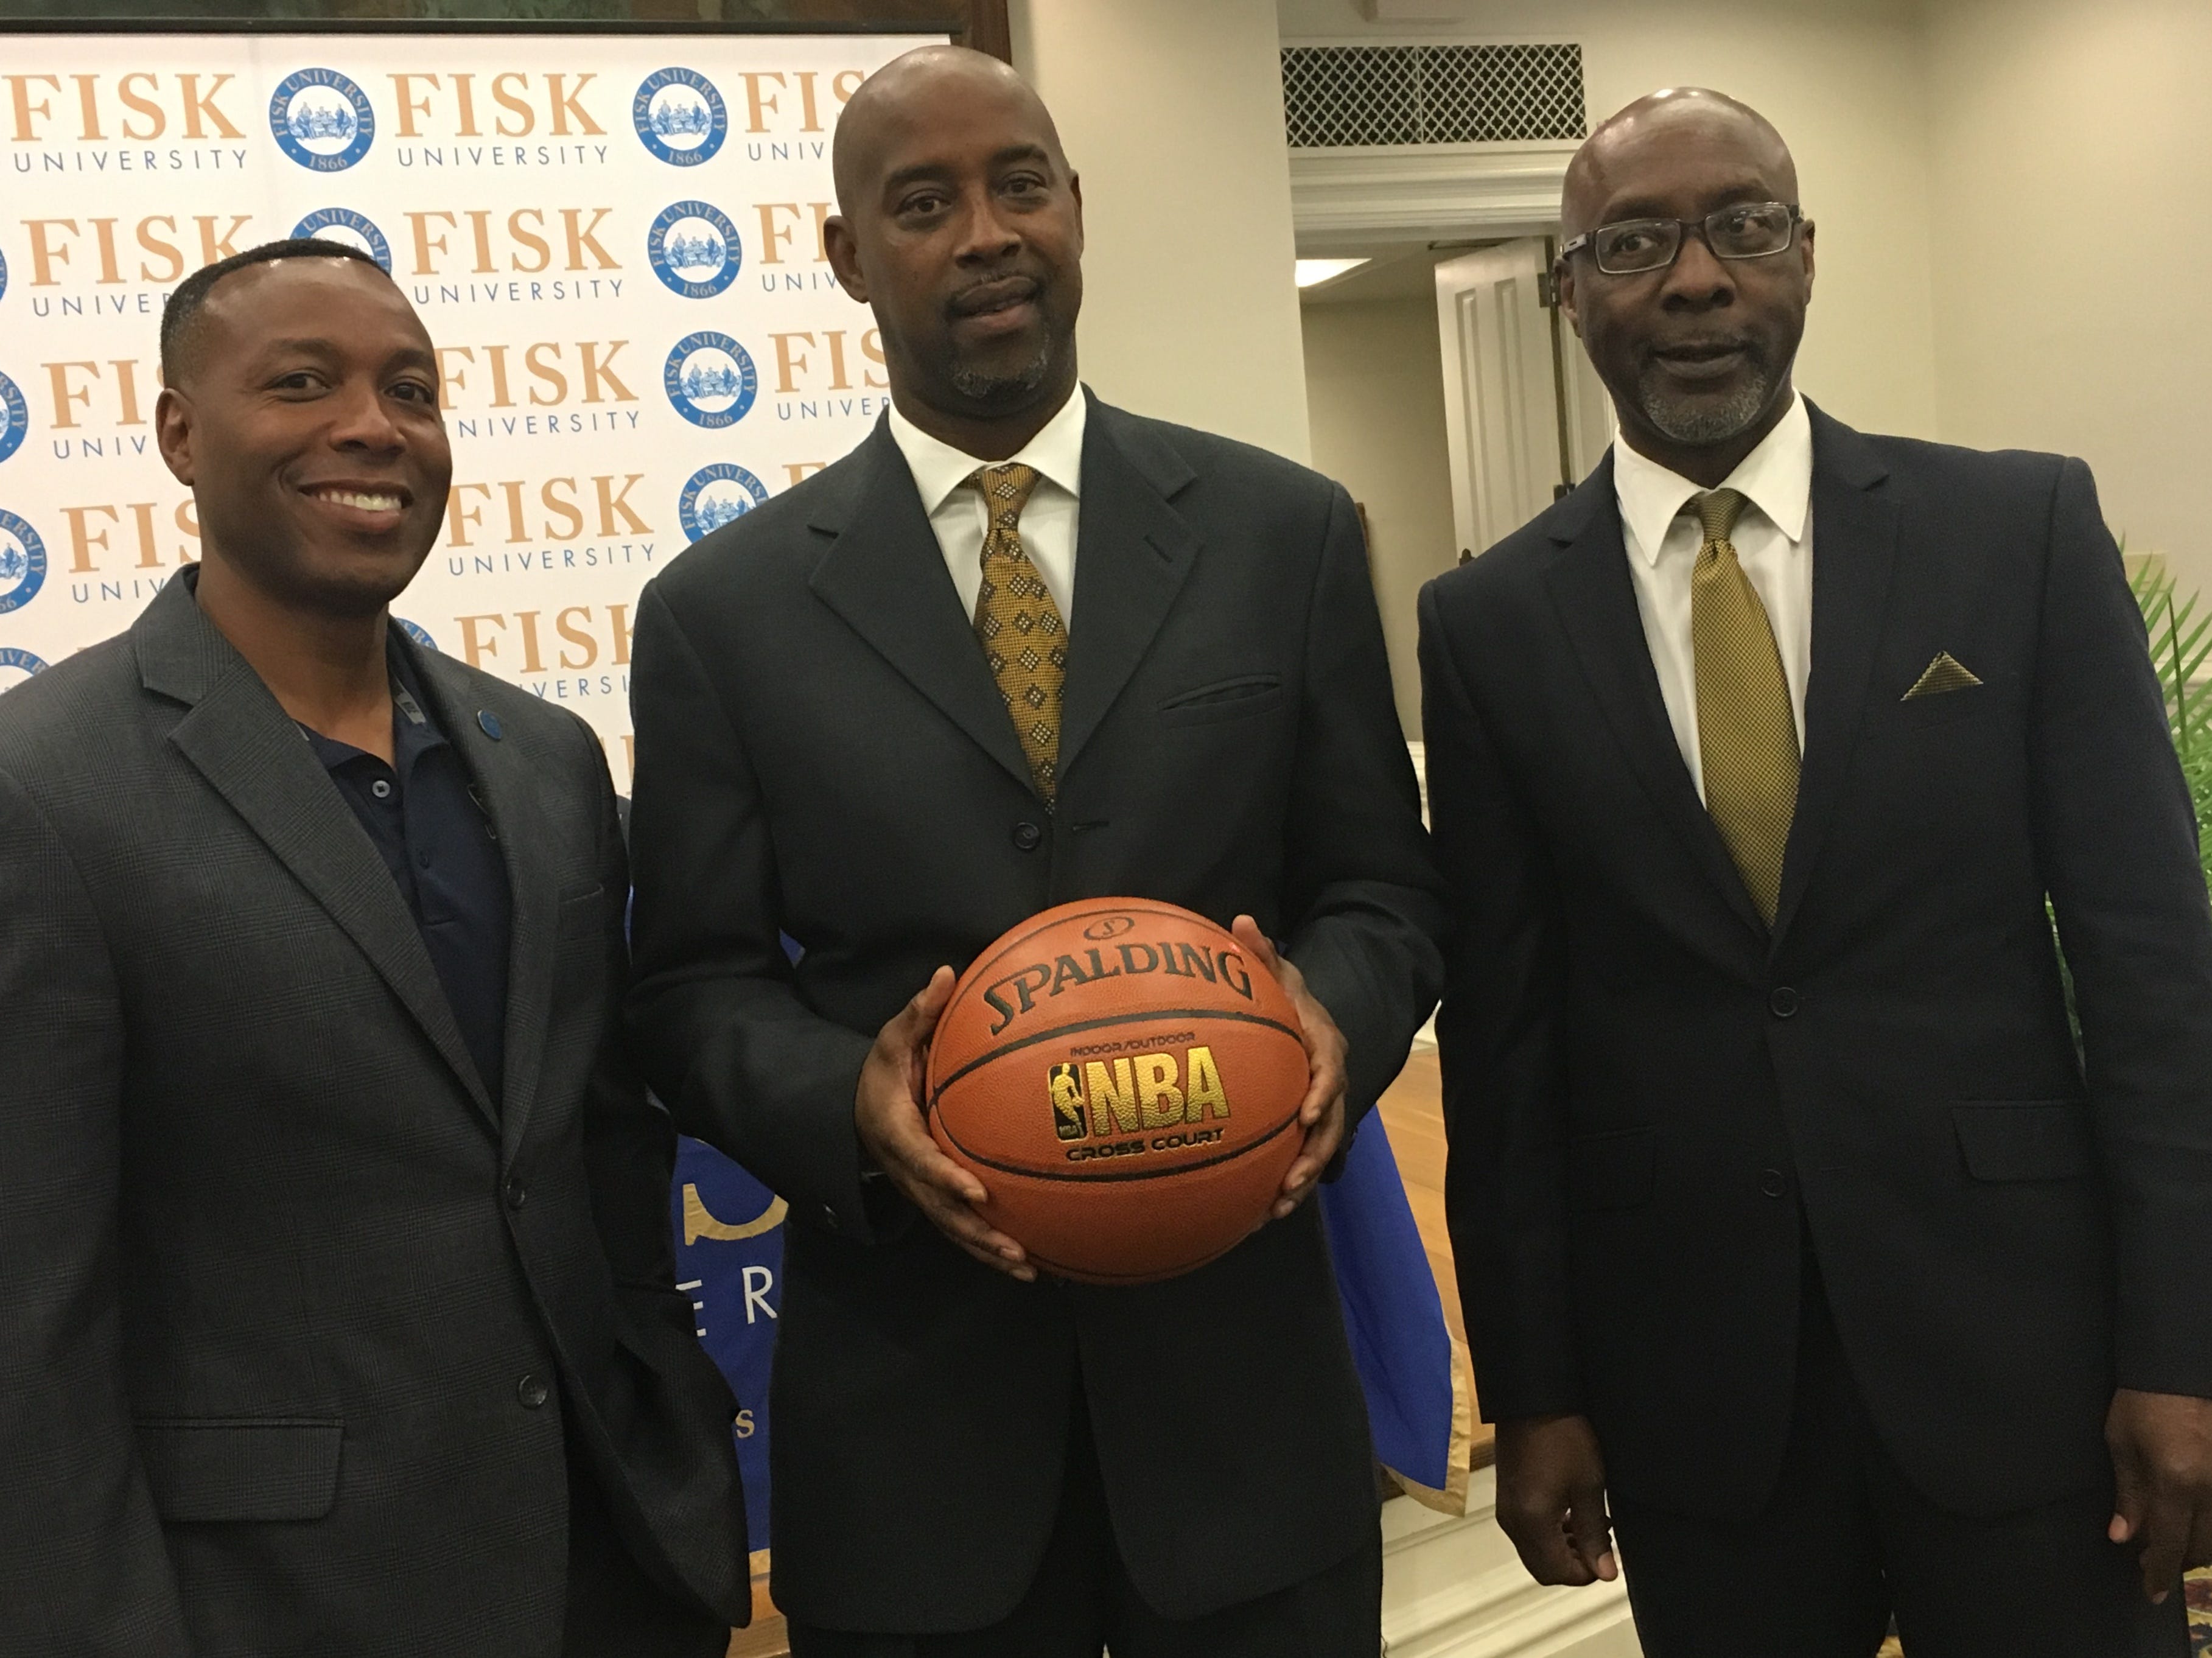 Kenny Anderson, center, with Fisk University President Kevin Rome, left, and athletic director Larry Glover.